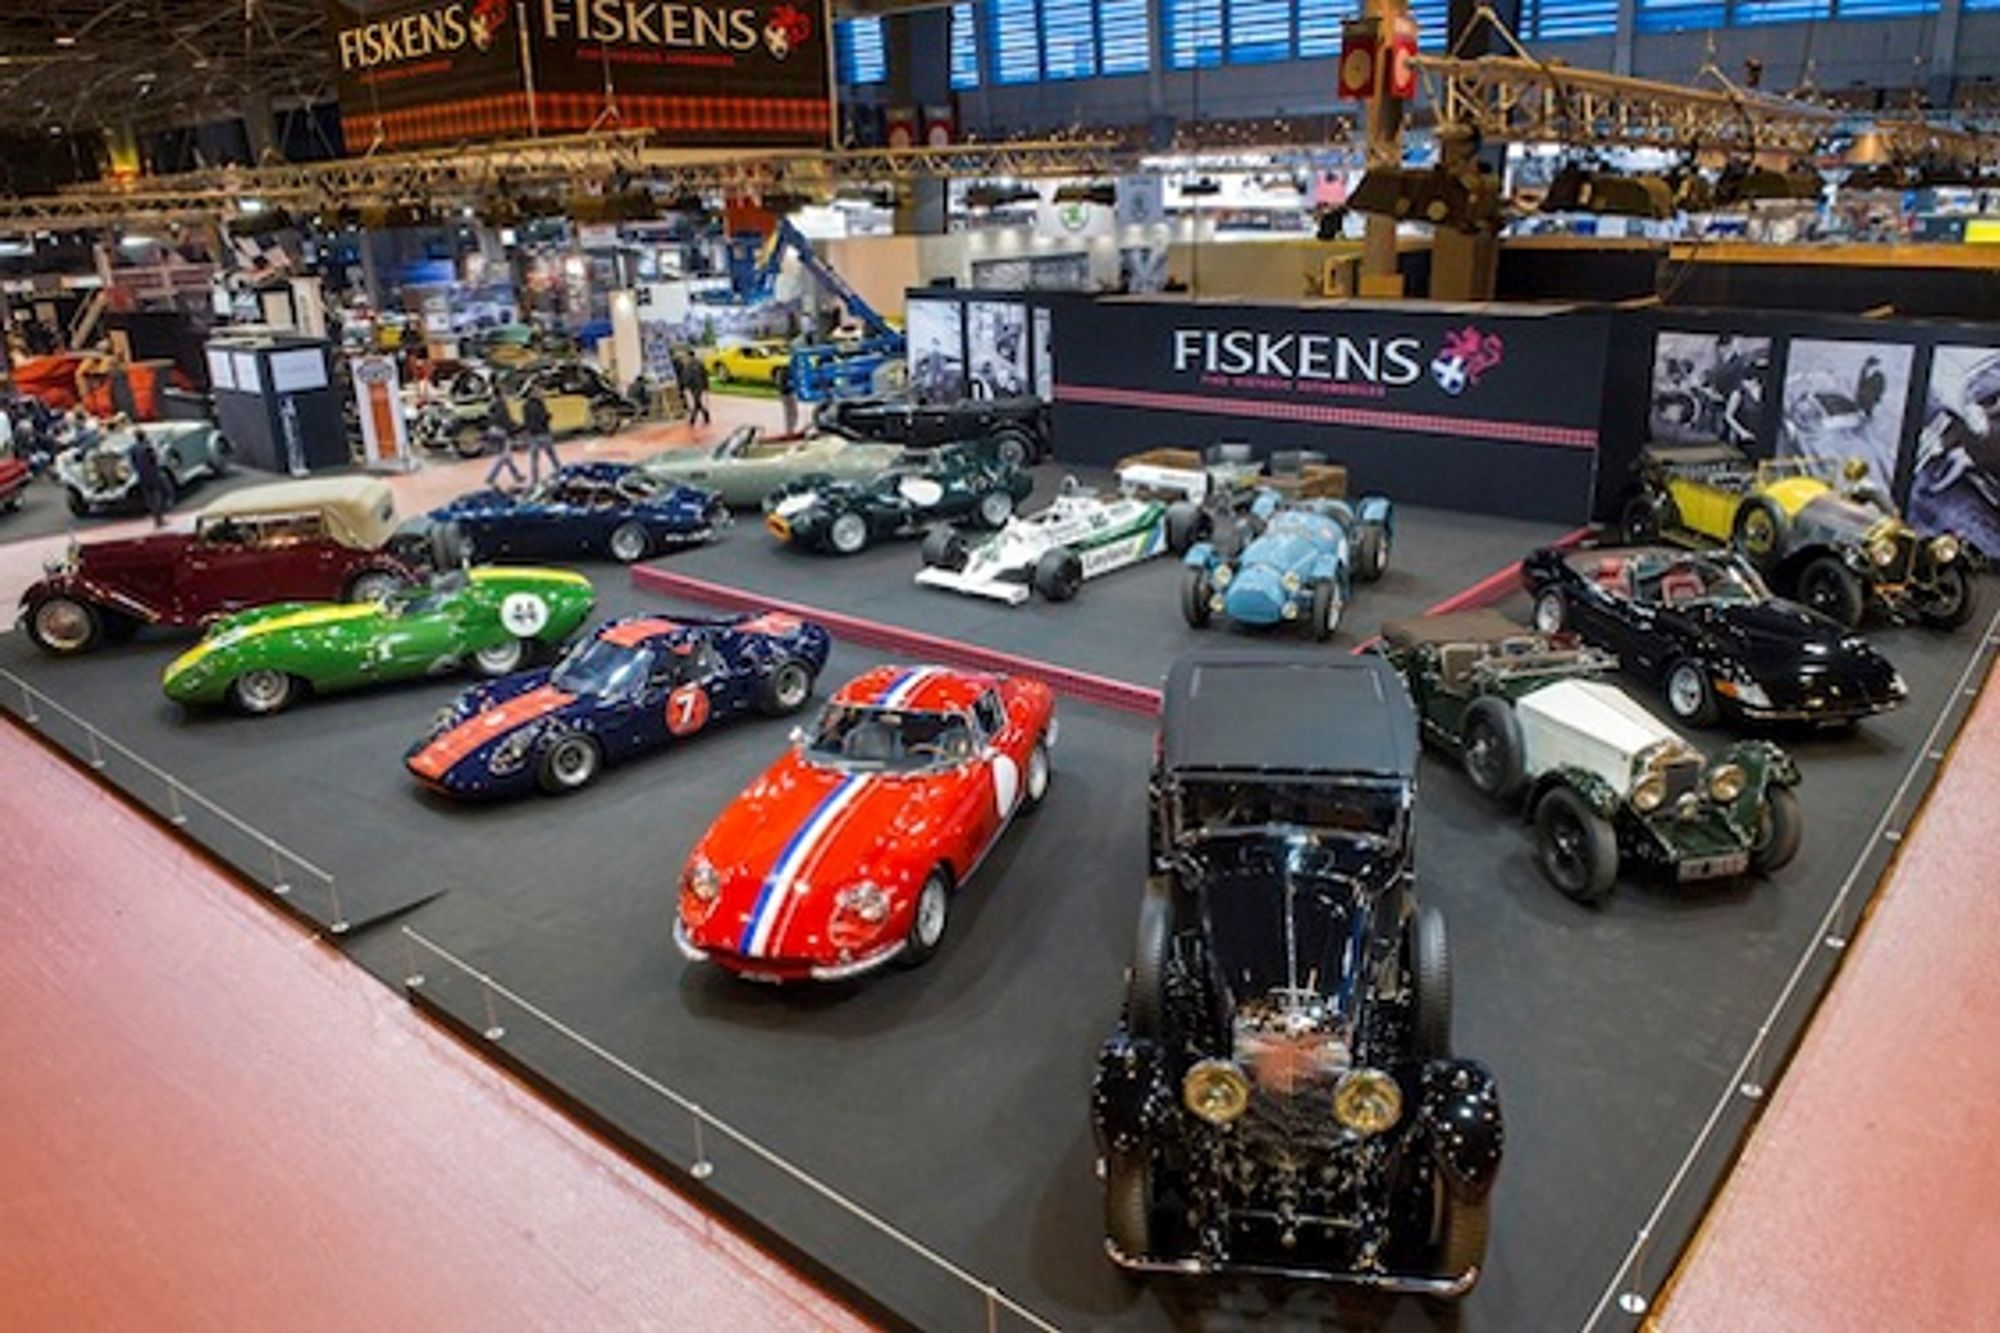 Covers come off Fiskens’ stunning 2014 Retromobile collection